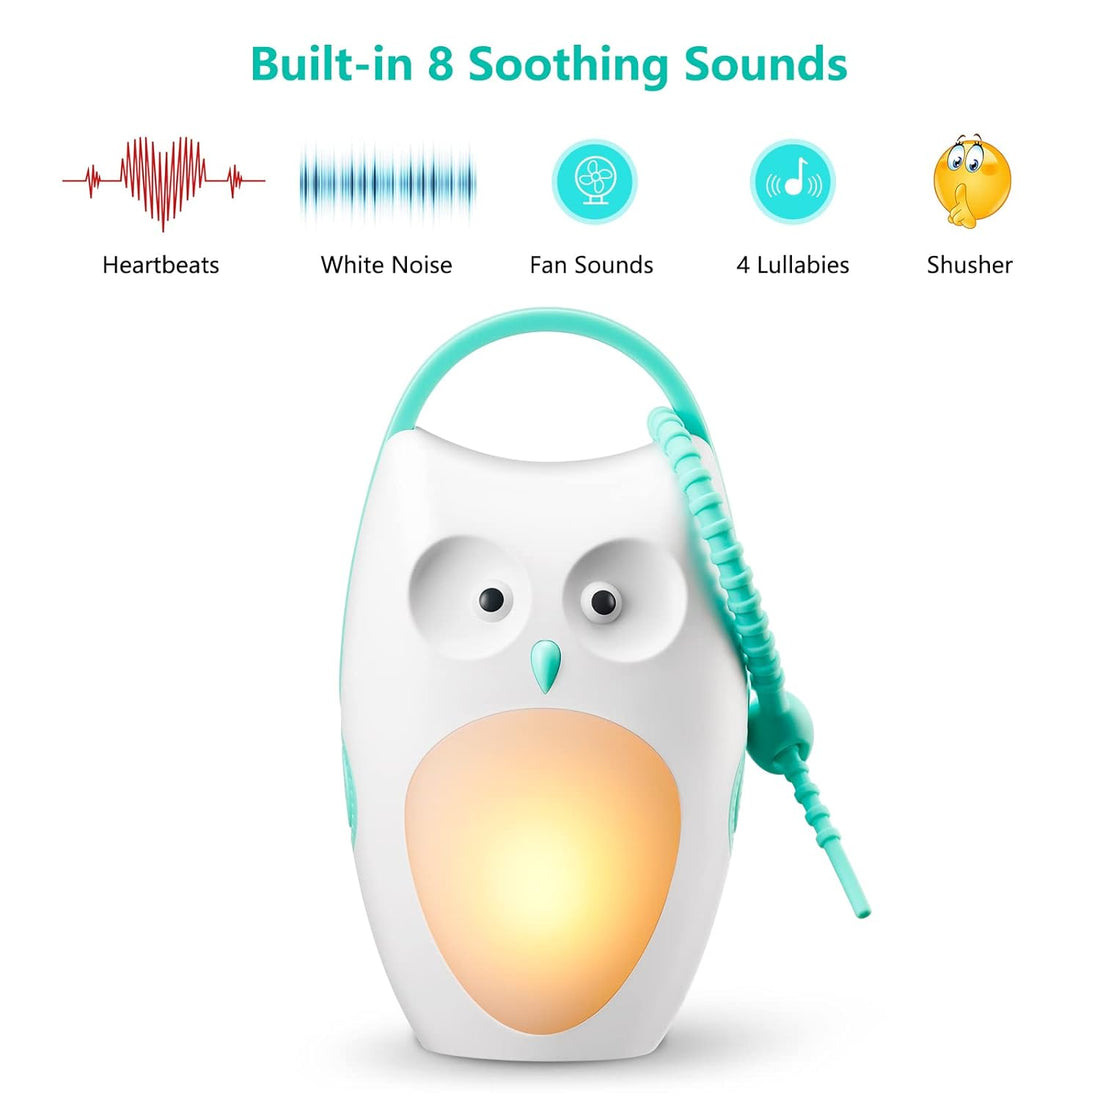 SOAIY Baby Sleep Soother Shusher Sound Machines, Baby Gift, Rechargeable Portable White Noise Machine with Night Light, 8 Soothing Sounds and 3 Timers for Traveling, Sleeping, Baby Carriage (owl)